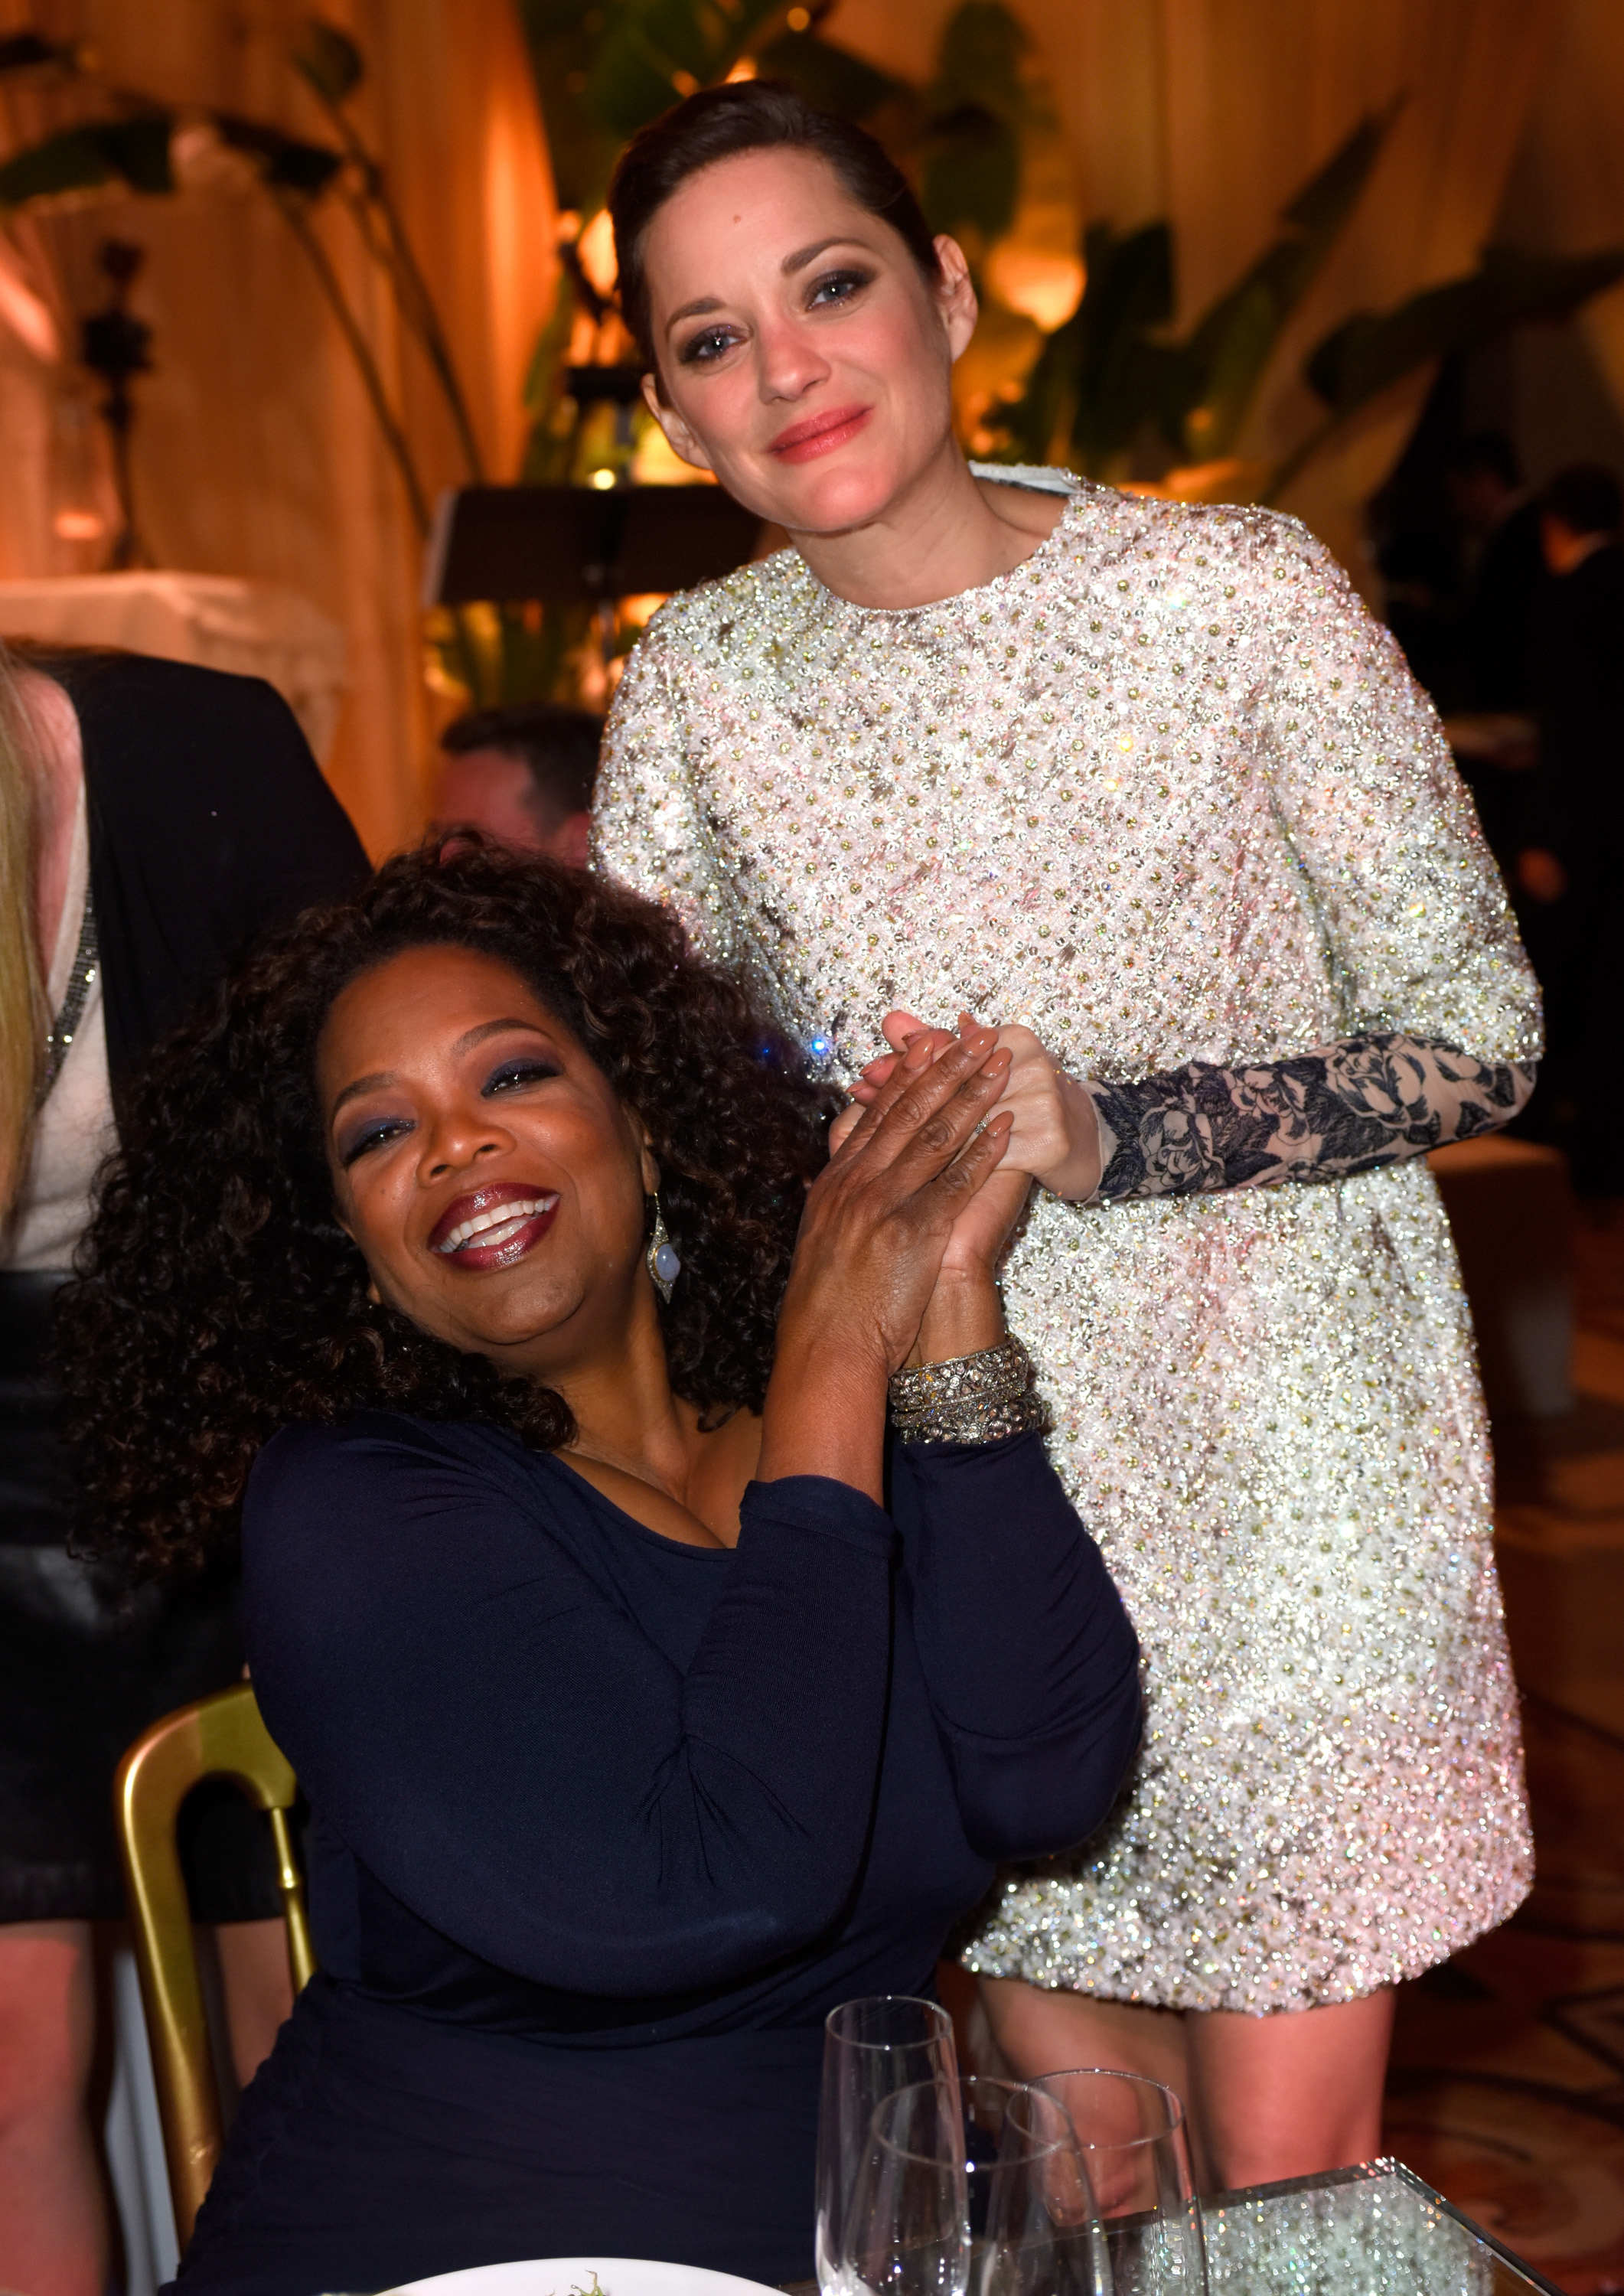 Producer/actress Oprah Winfrey (L) and actress Marion Cotillard attend The Weinstein Company's Academy Awards Nominees Dinner